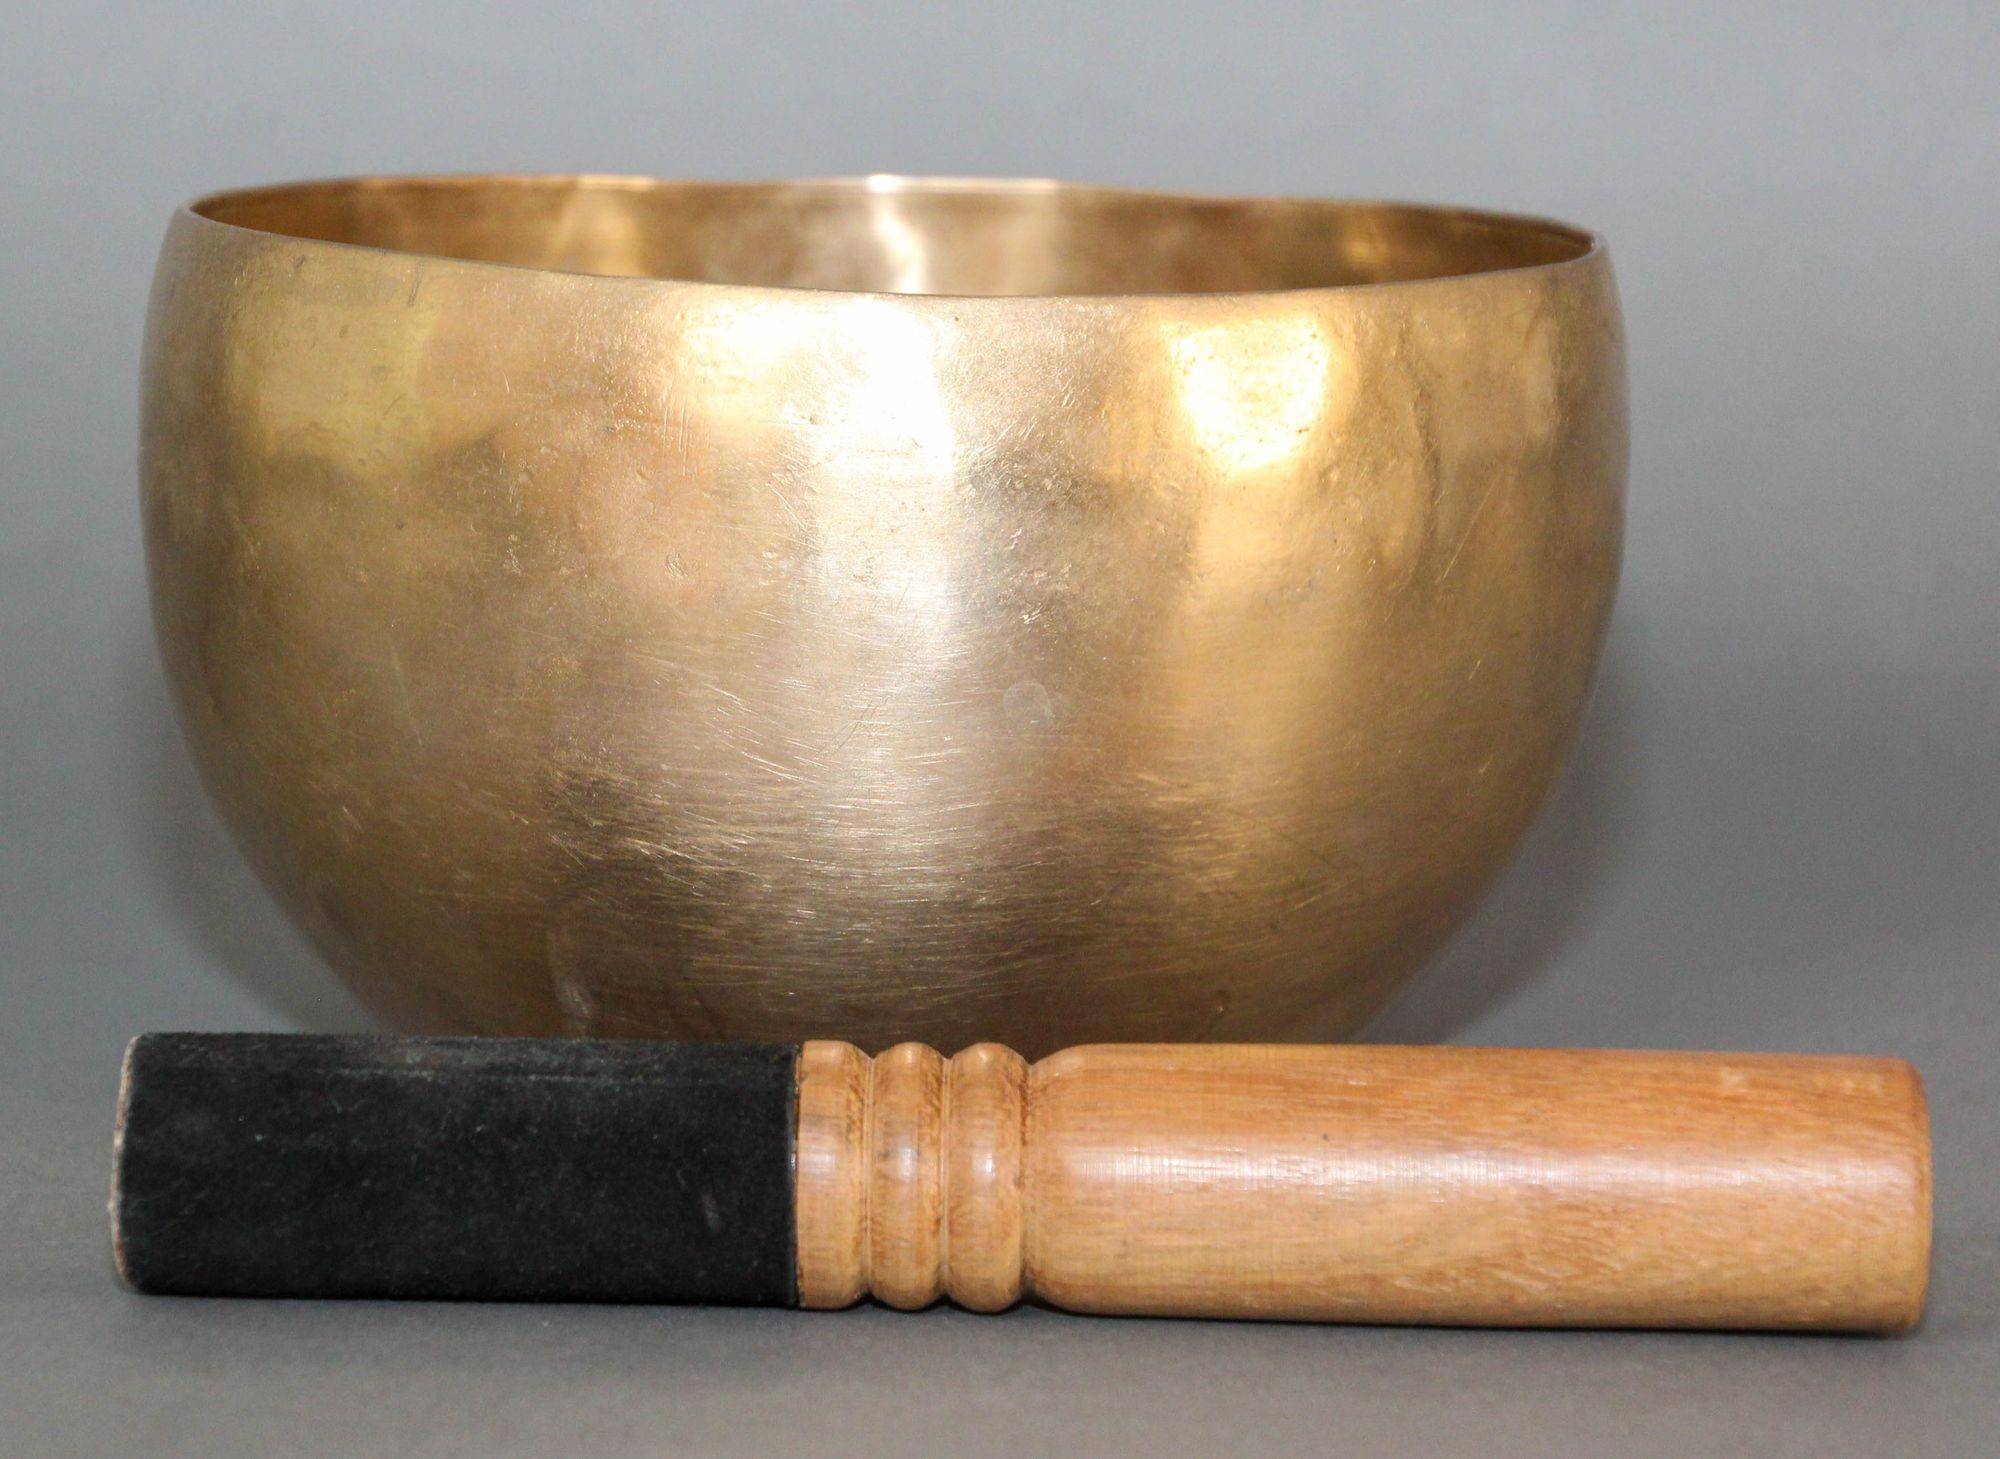 Large Hand-Hammered Brass Singing Bowl.
Large hand-hammered Tibetan bronze bowl are used in some Buddhist religious practices to accompany periods of meditation and chanting.
They have become popular with music therapists, sound healers and yoga